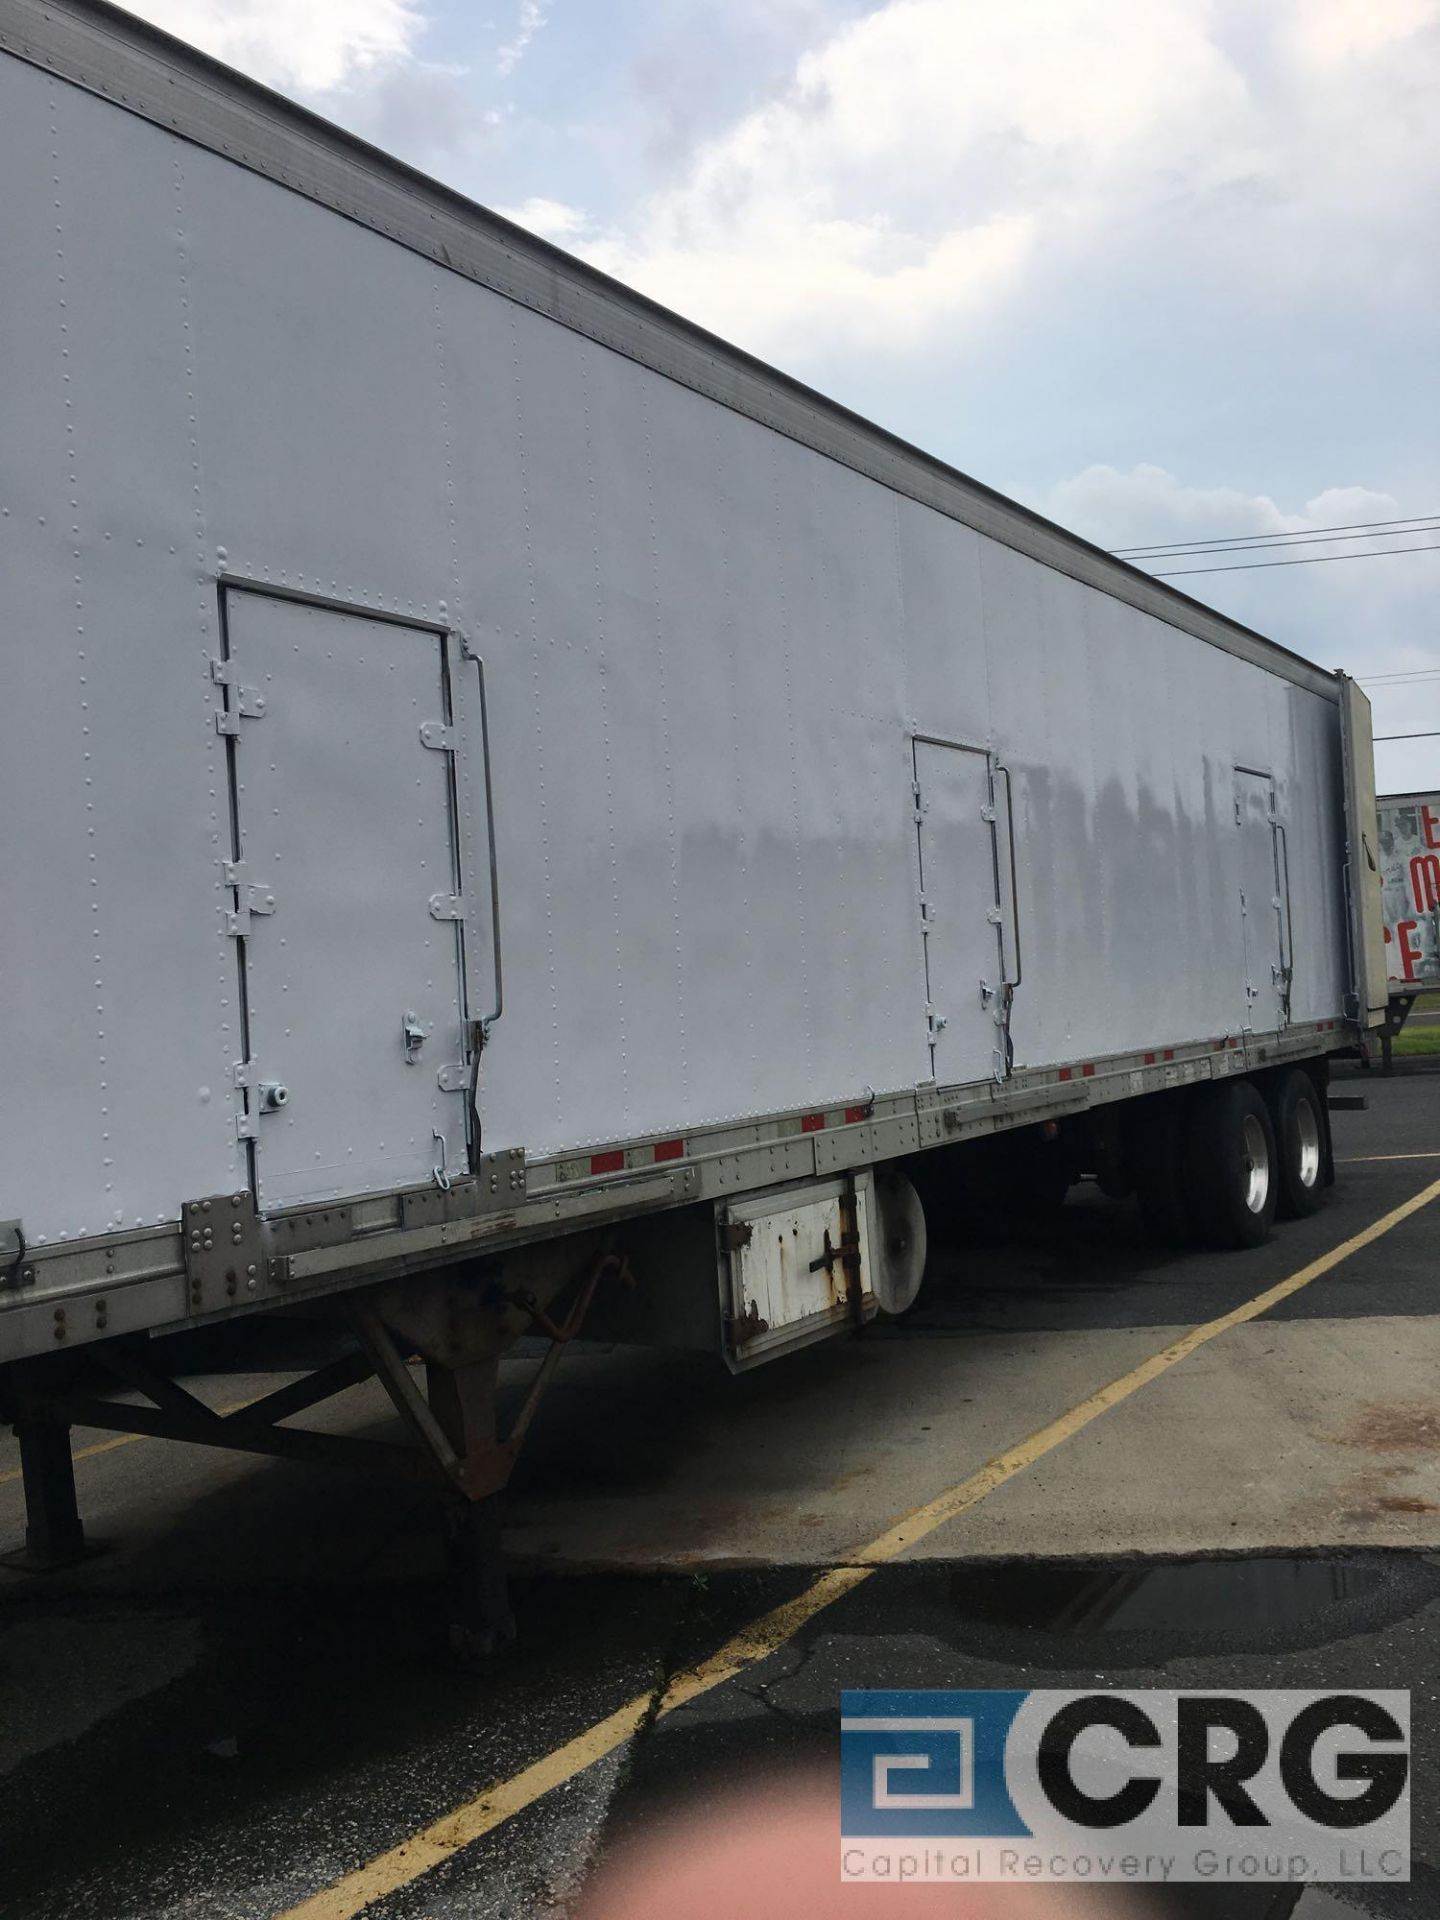 2004 Great Dane Multi Temp Refrigerated Semi Trailer - 45 Long, 96" wide, Carrier Stealth, 17569 - Image 3 of 8